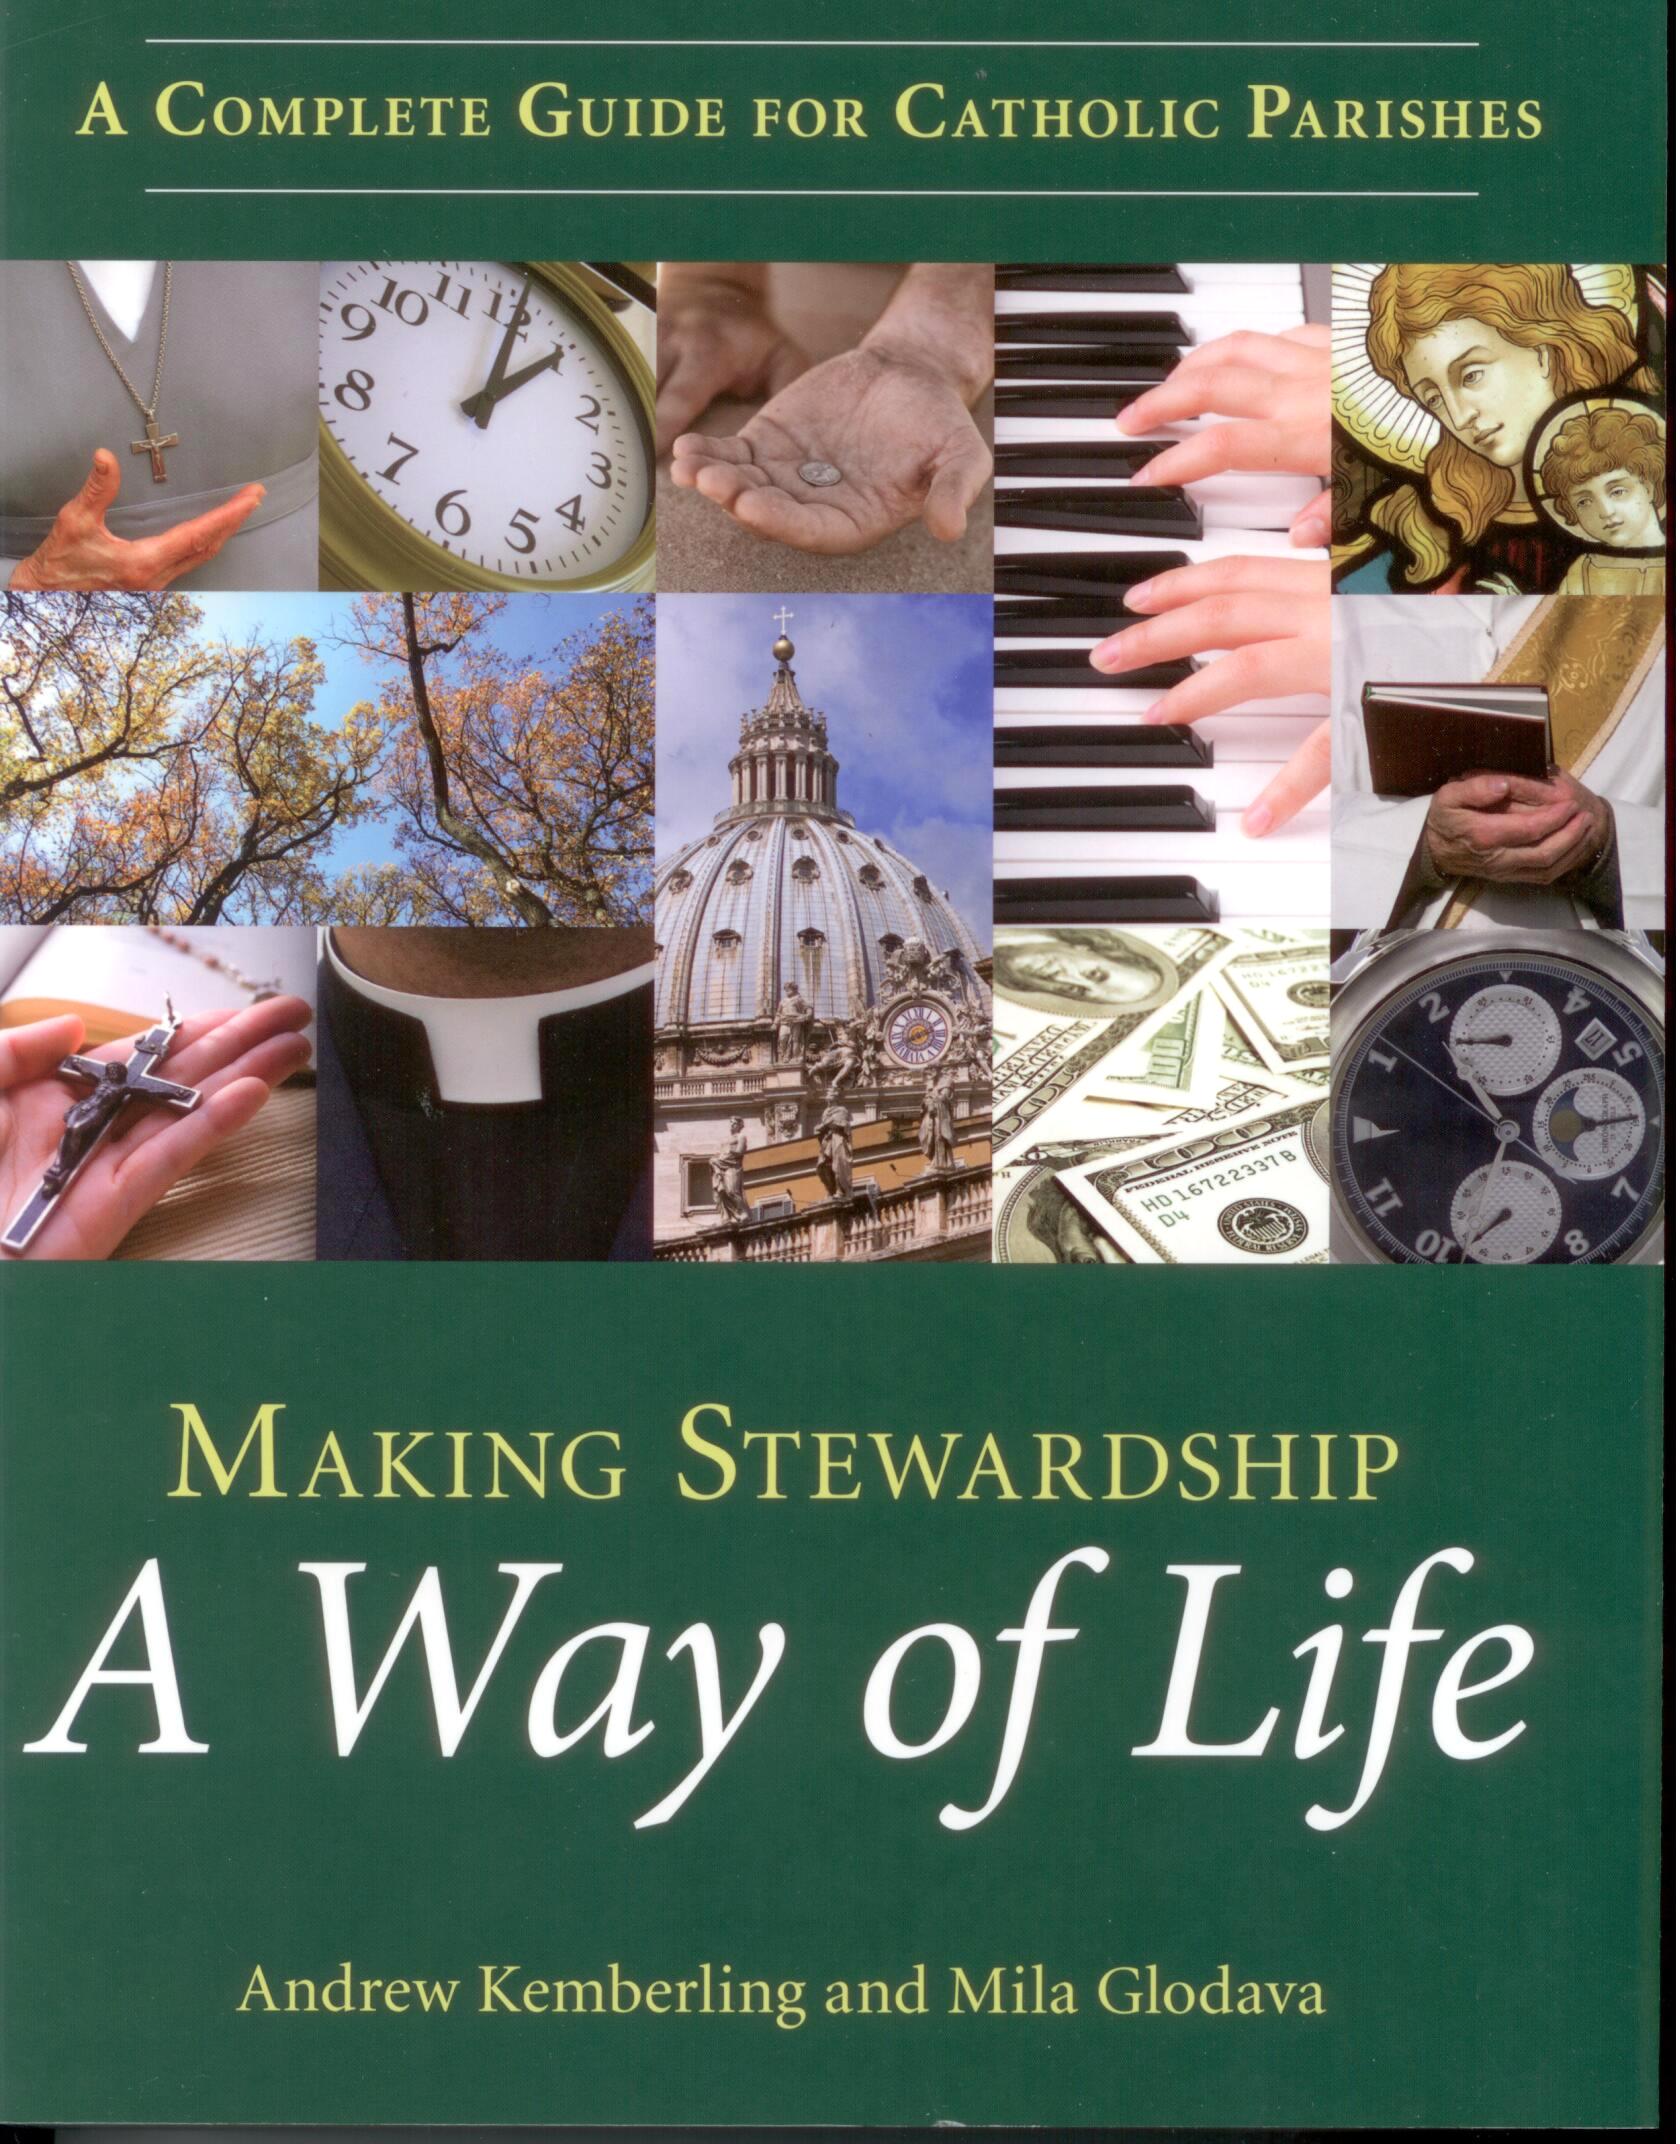 Making Stewardship a Way of Life by Andrew Kemberling and Mila Glodava